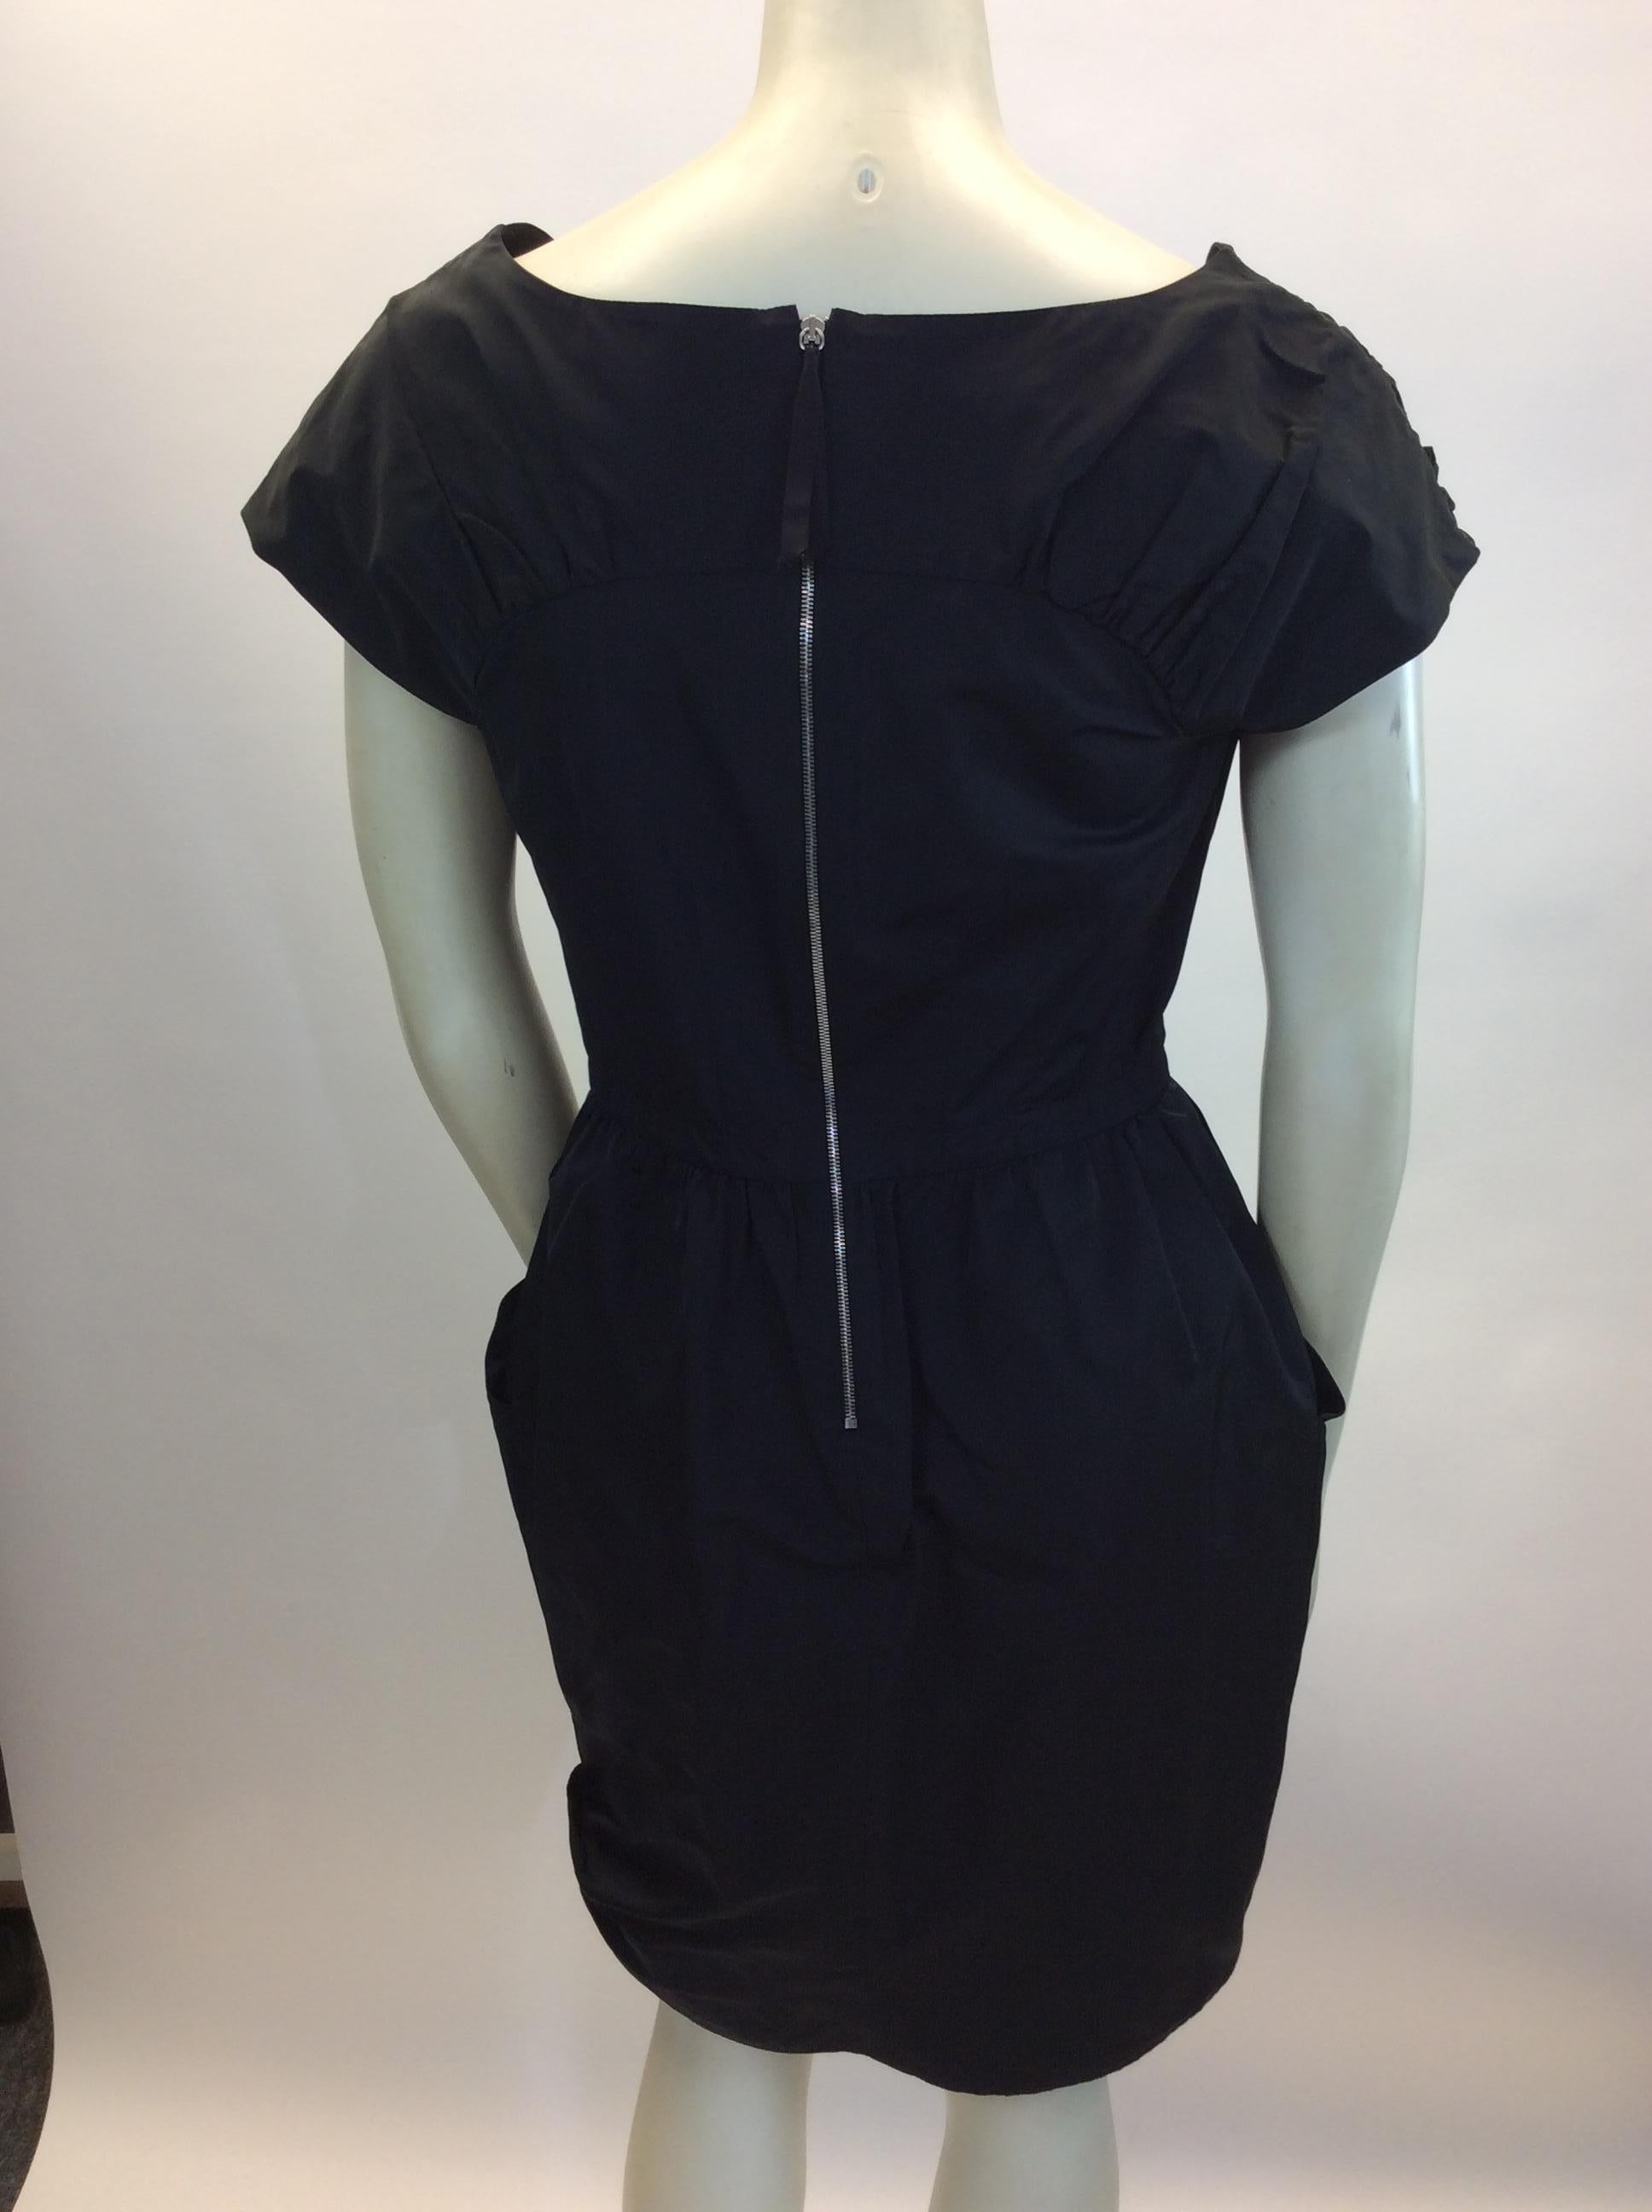 Nina Ricci Black Dress In Good Condition For Sale In Narberth, PA